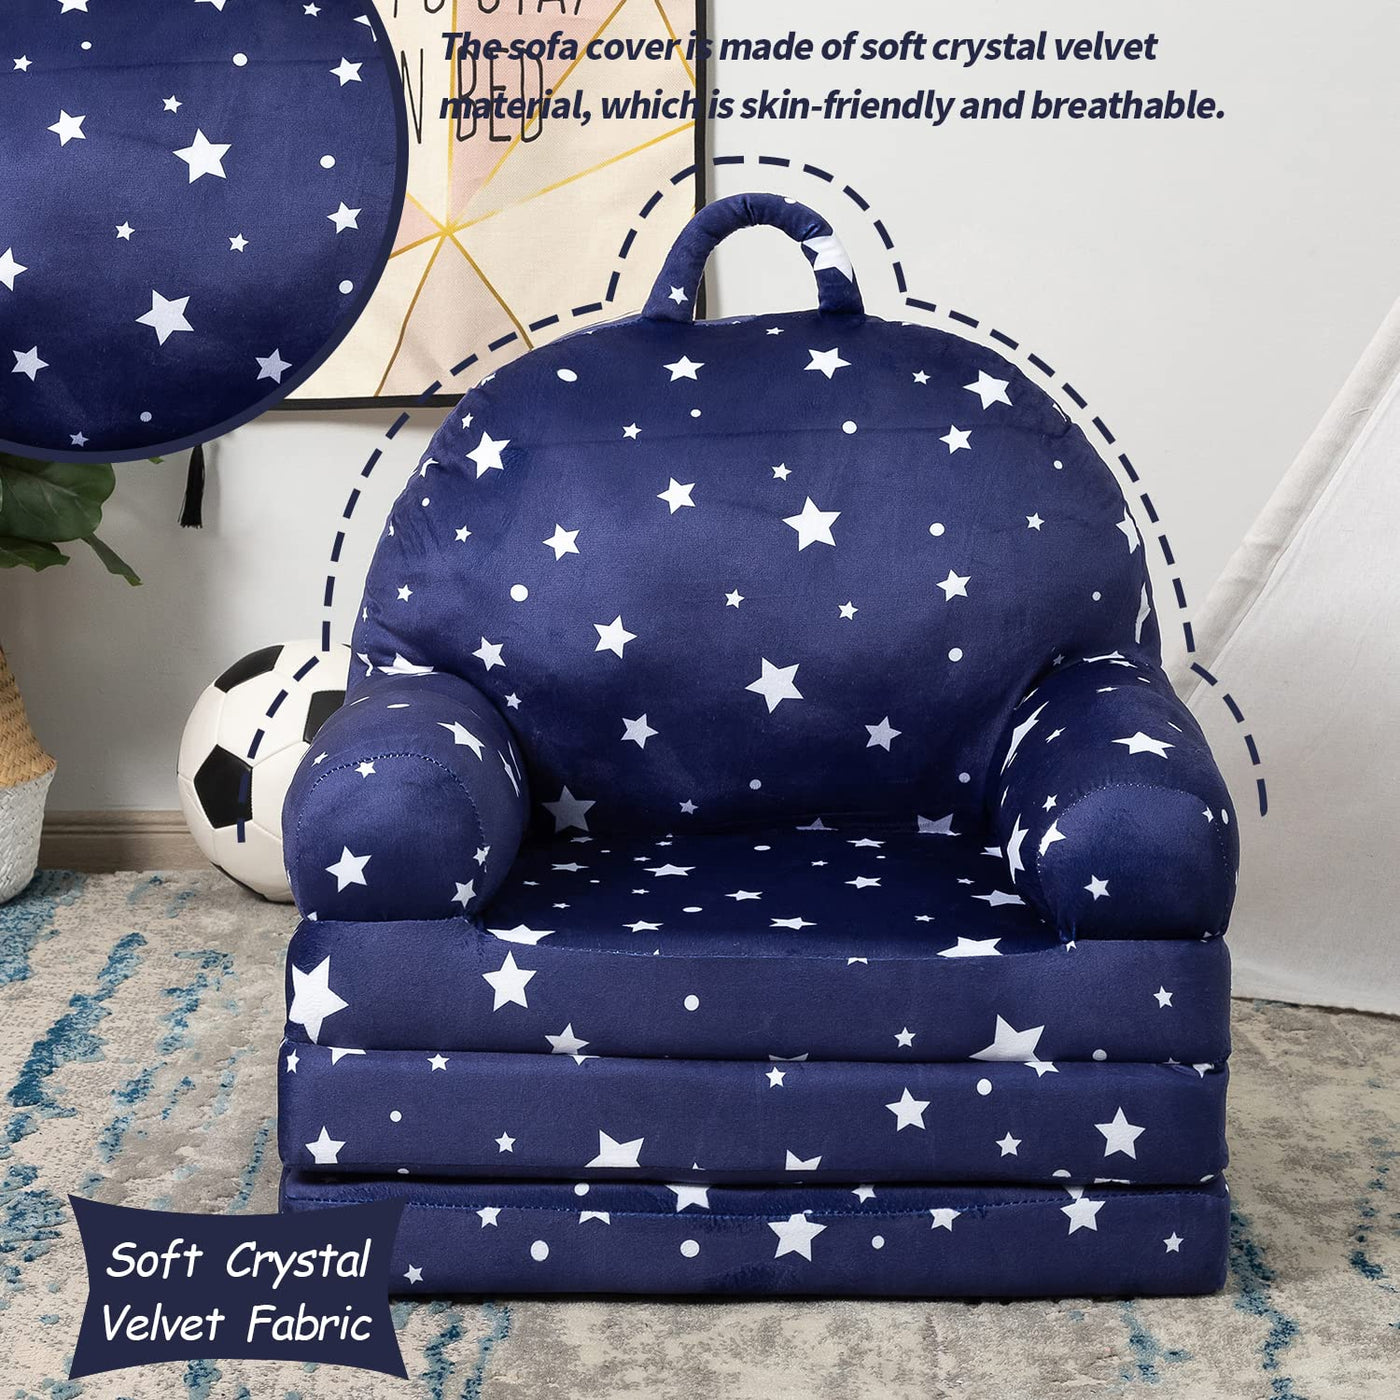 MAXYOYO Foldable Kids Sofa, Children Couch Backrest Armchair Bed with Pocket, Star Pattern